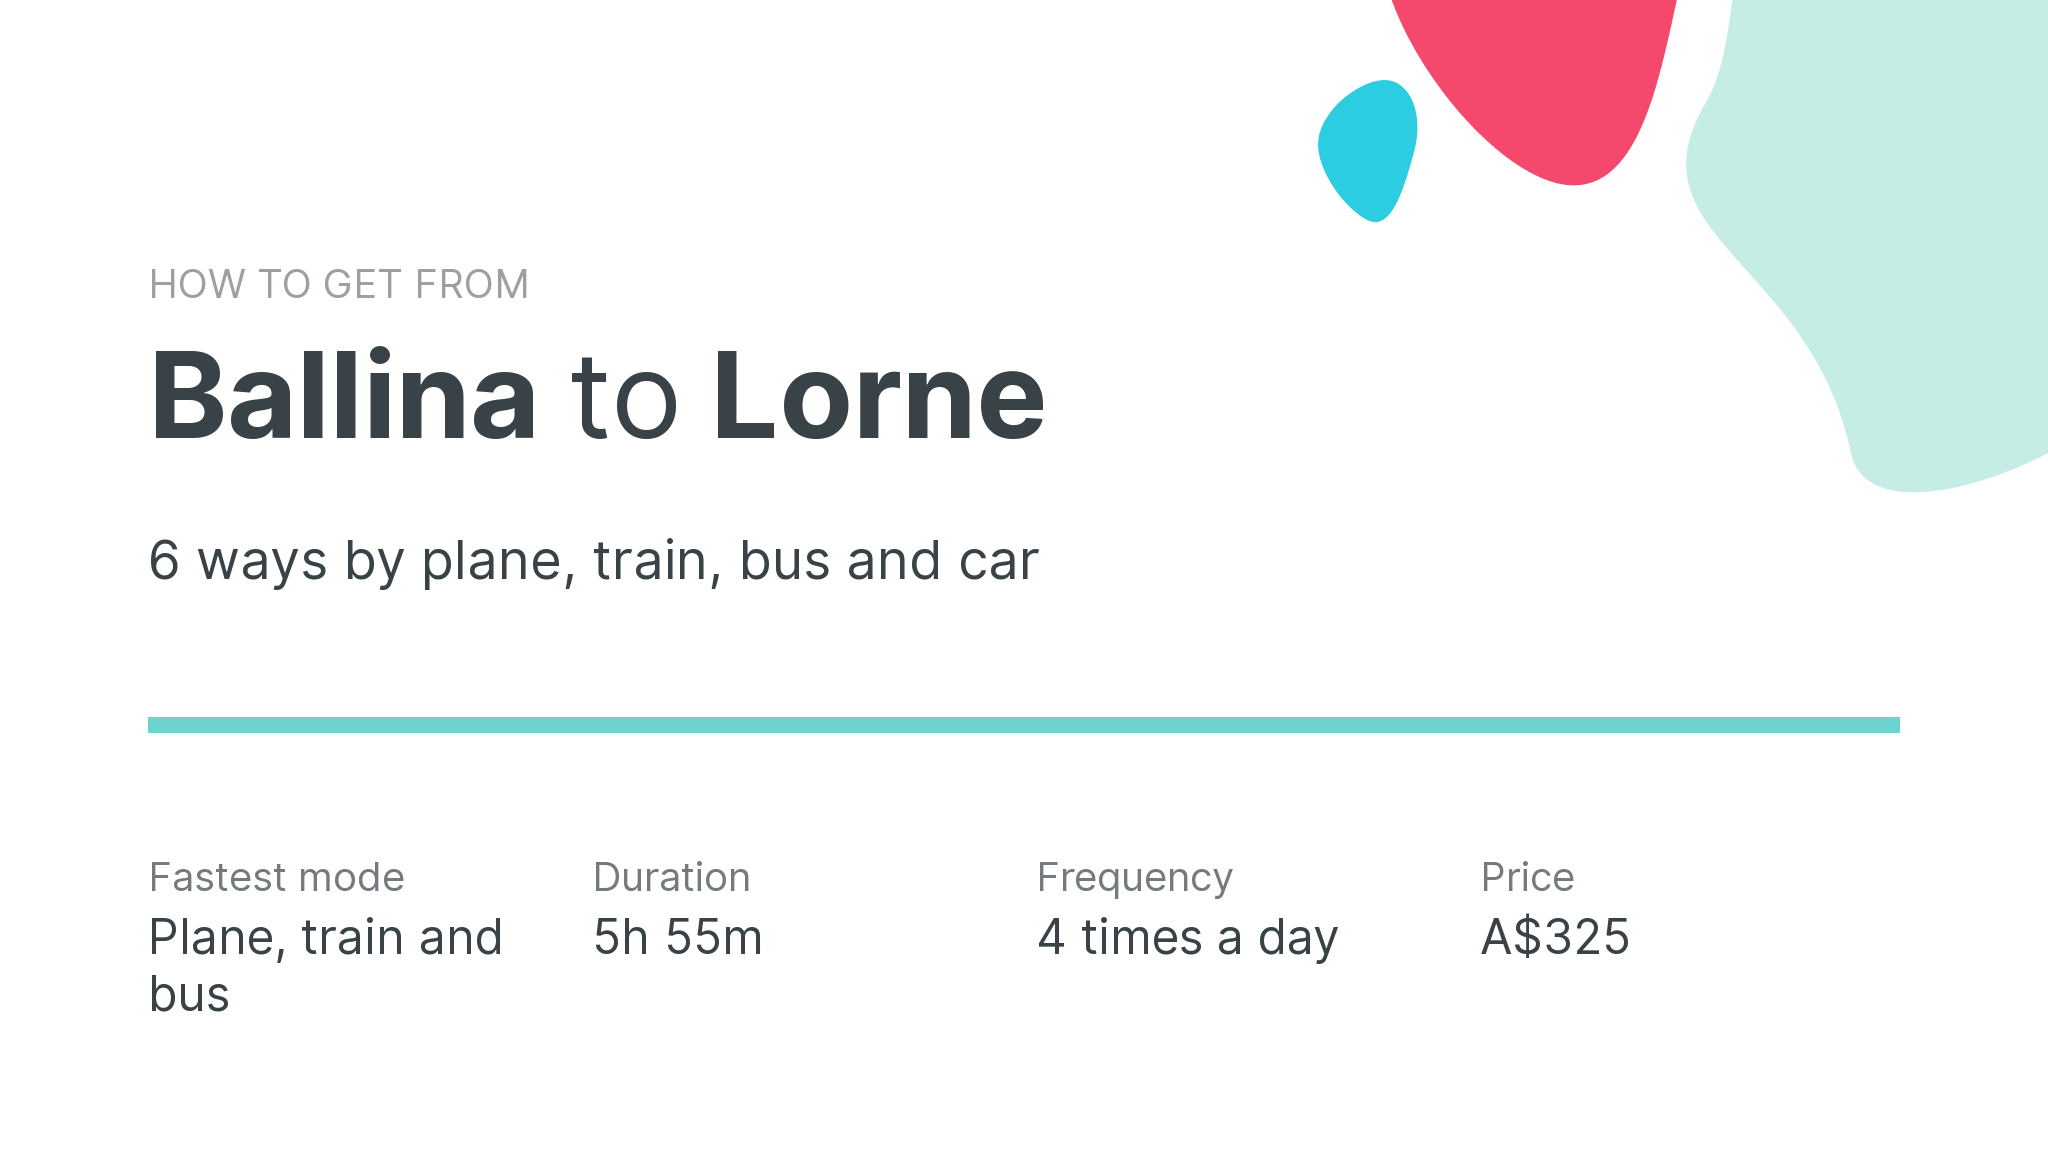 How do I get from Ballina to Lorne